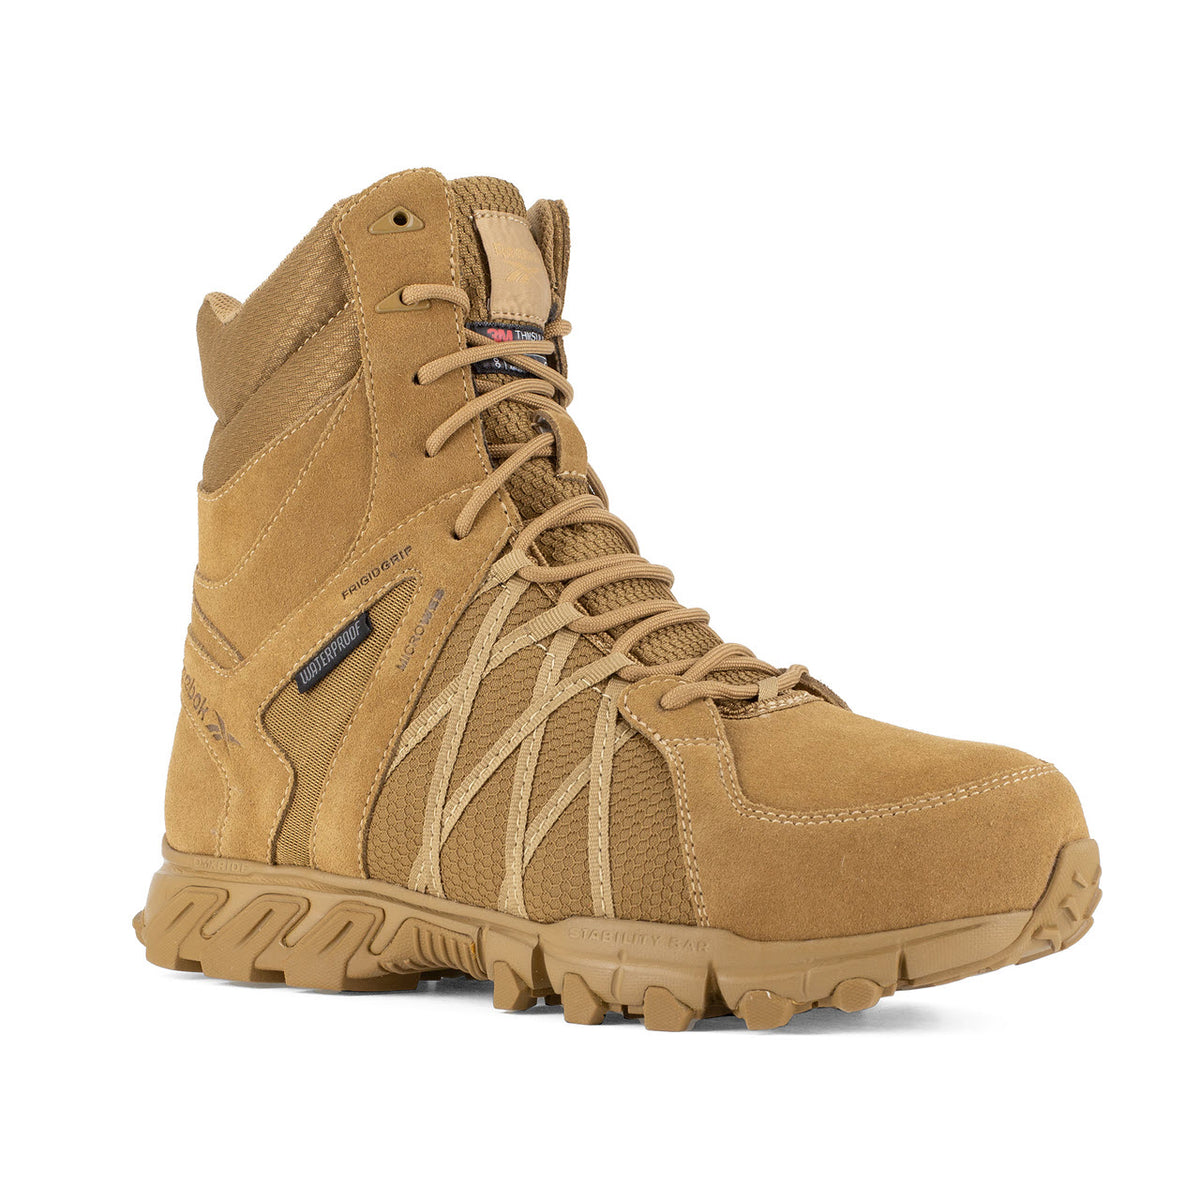 A tan Reebok Work CT Trailgrip Tactical Zip WP boot with a composite toe isolated on a white background.